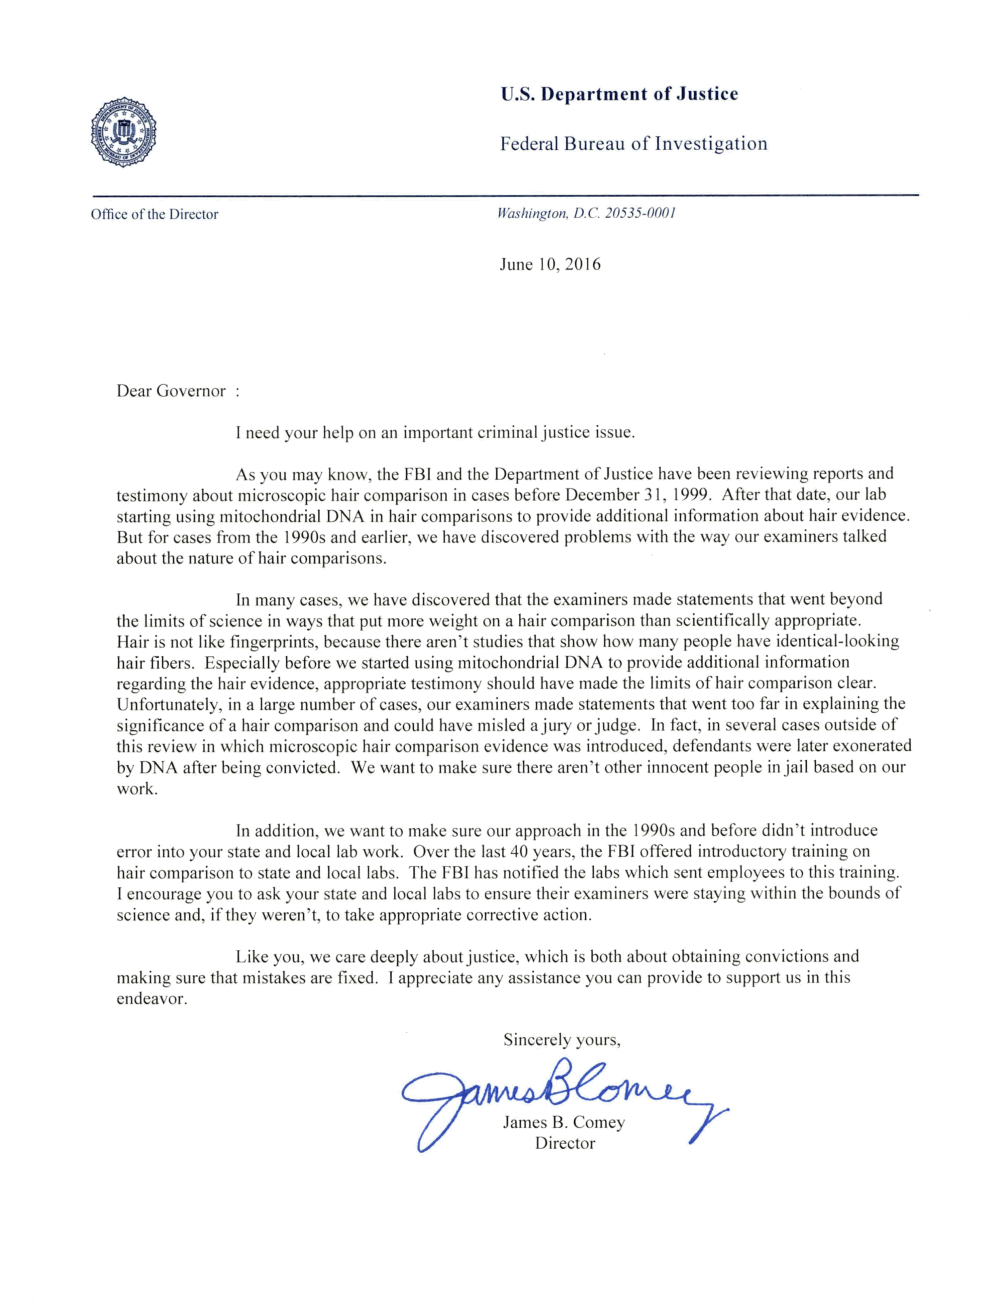 Director Comey Letter to Additional Governors on State Reviews — FBI